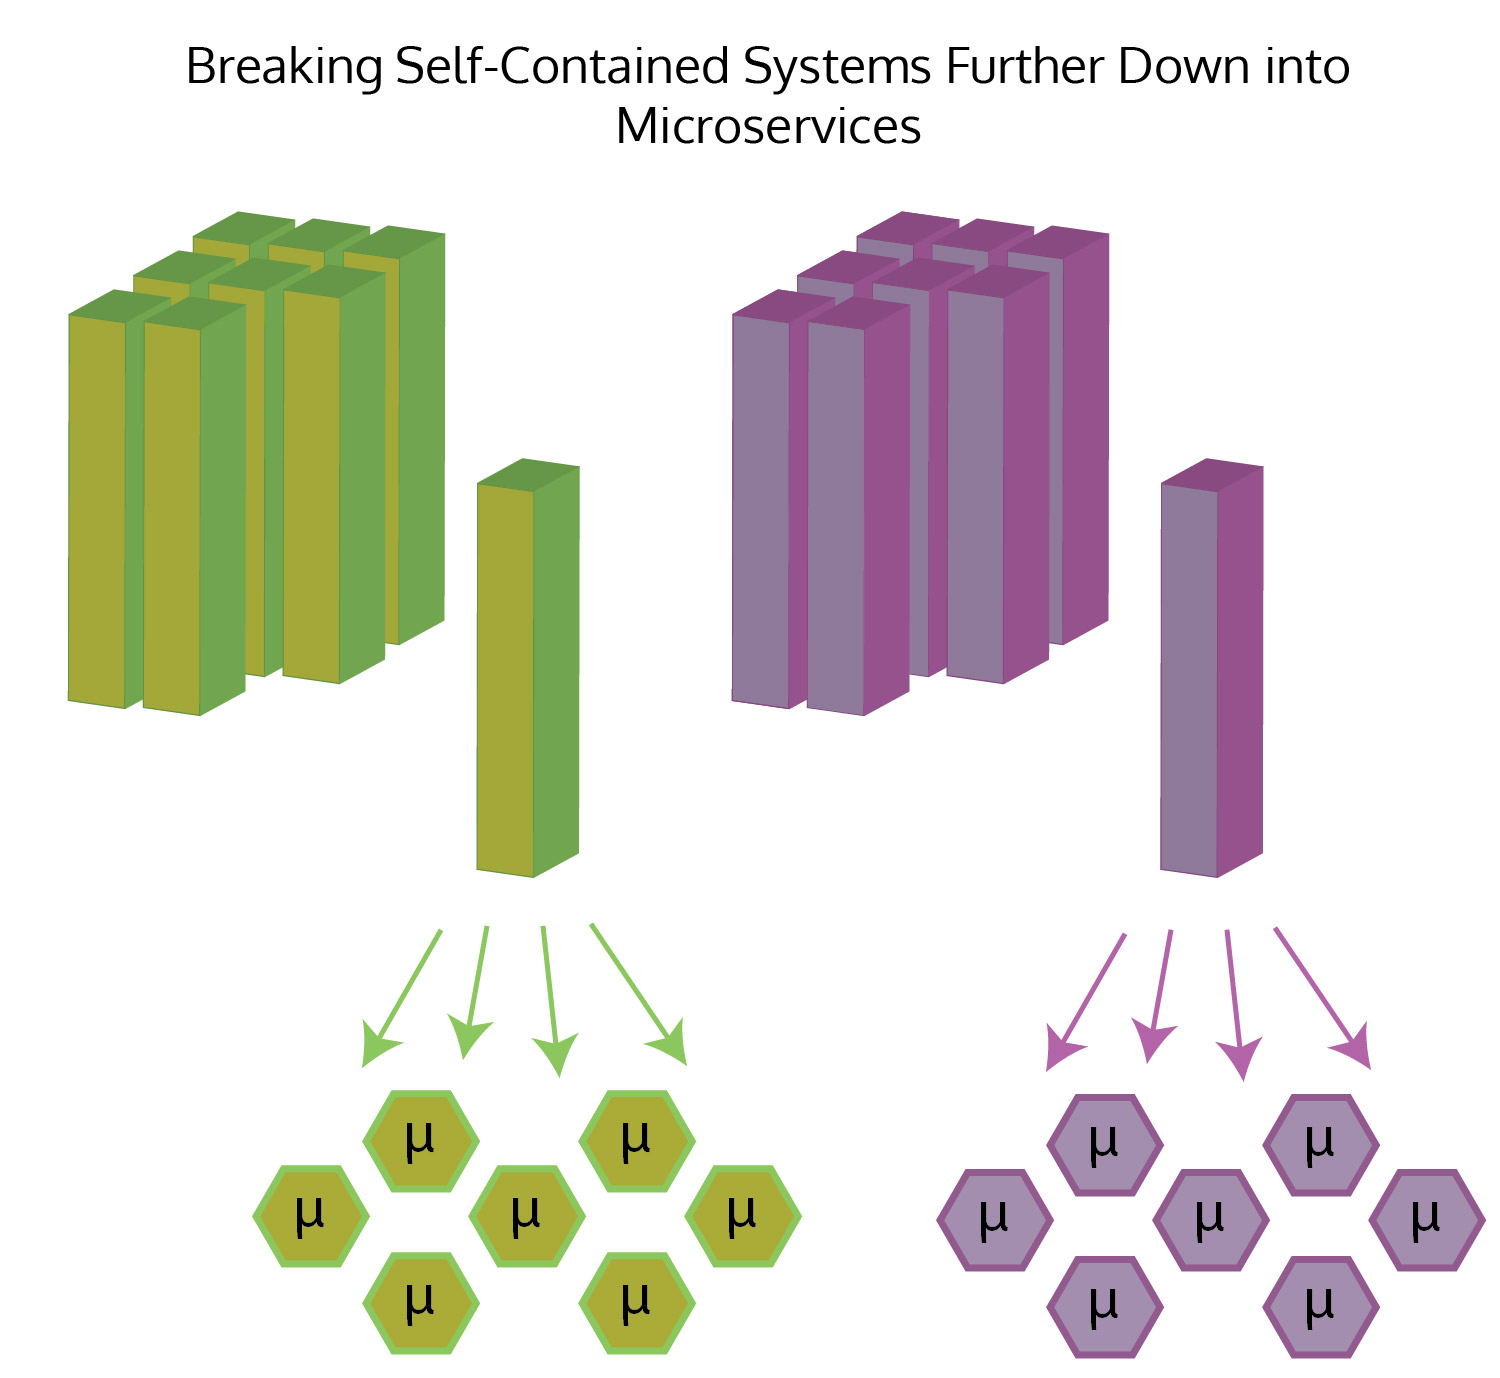 Breaking Self-Contained Systems down into microservices